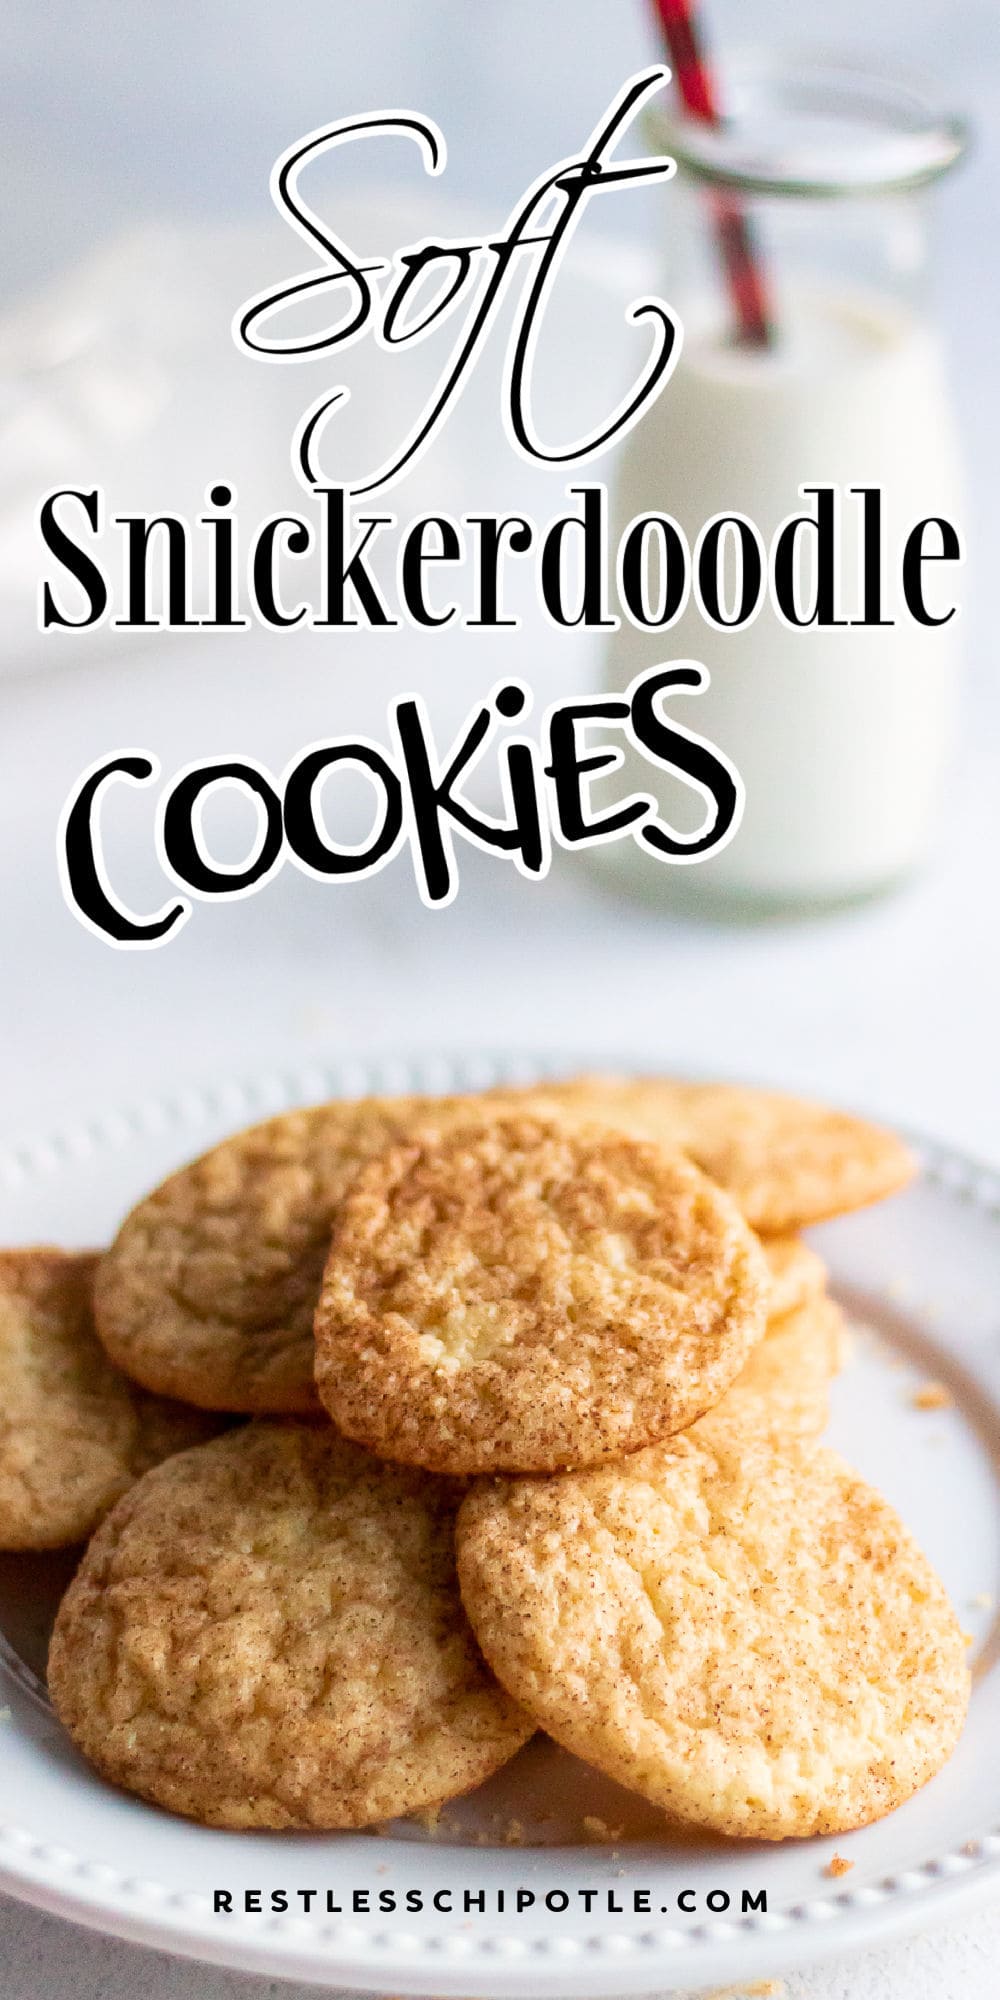 Old Fashioned Snickerdoodle Cookies Recipe - Restless Chipotle